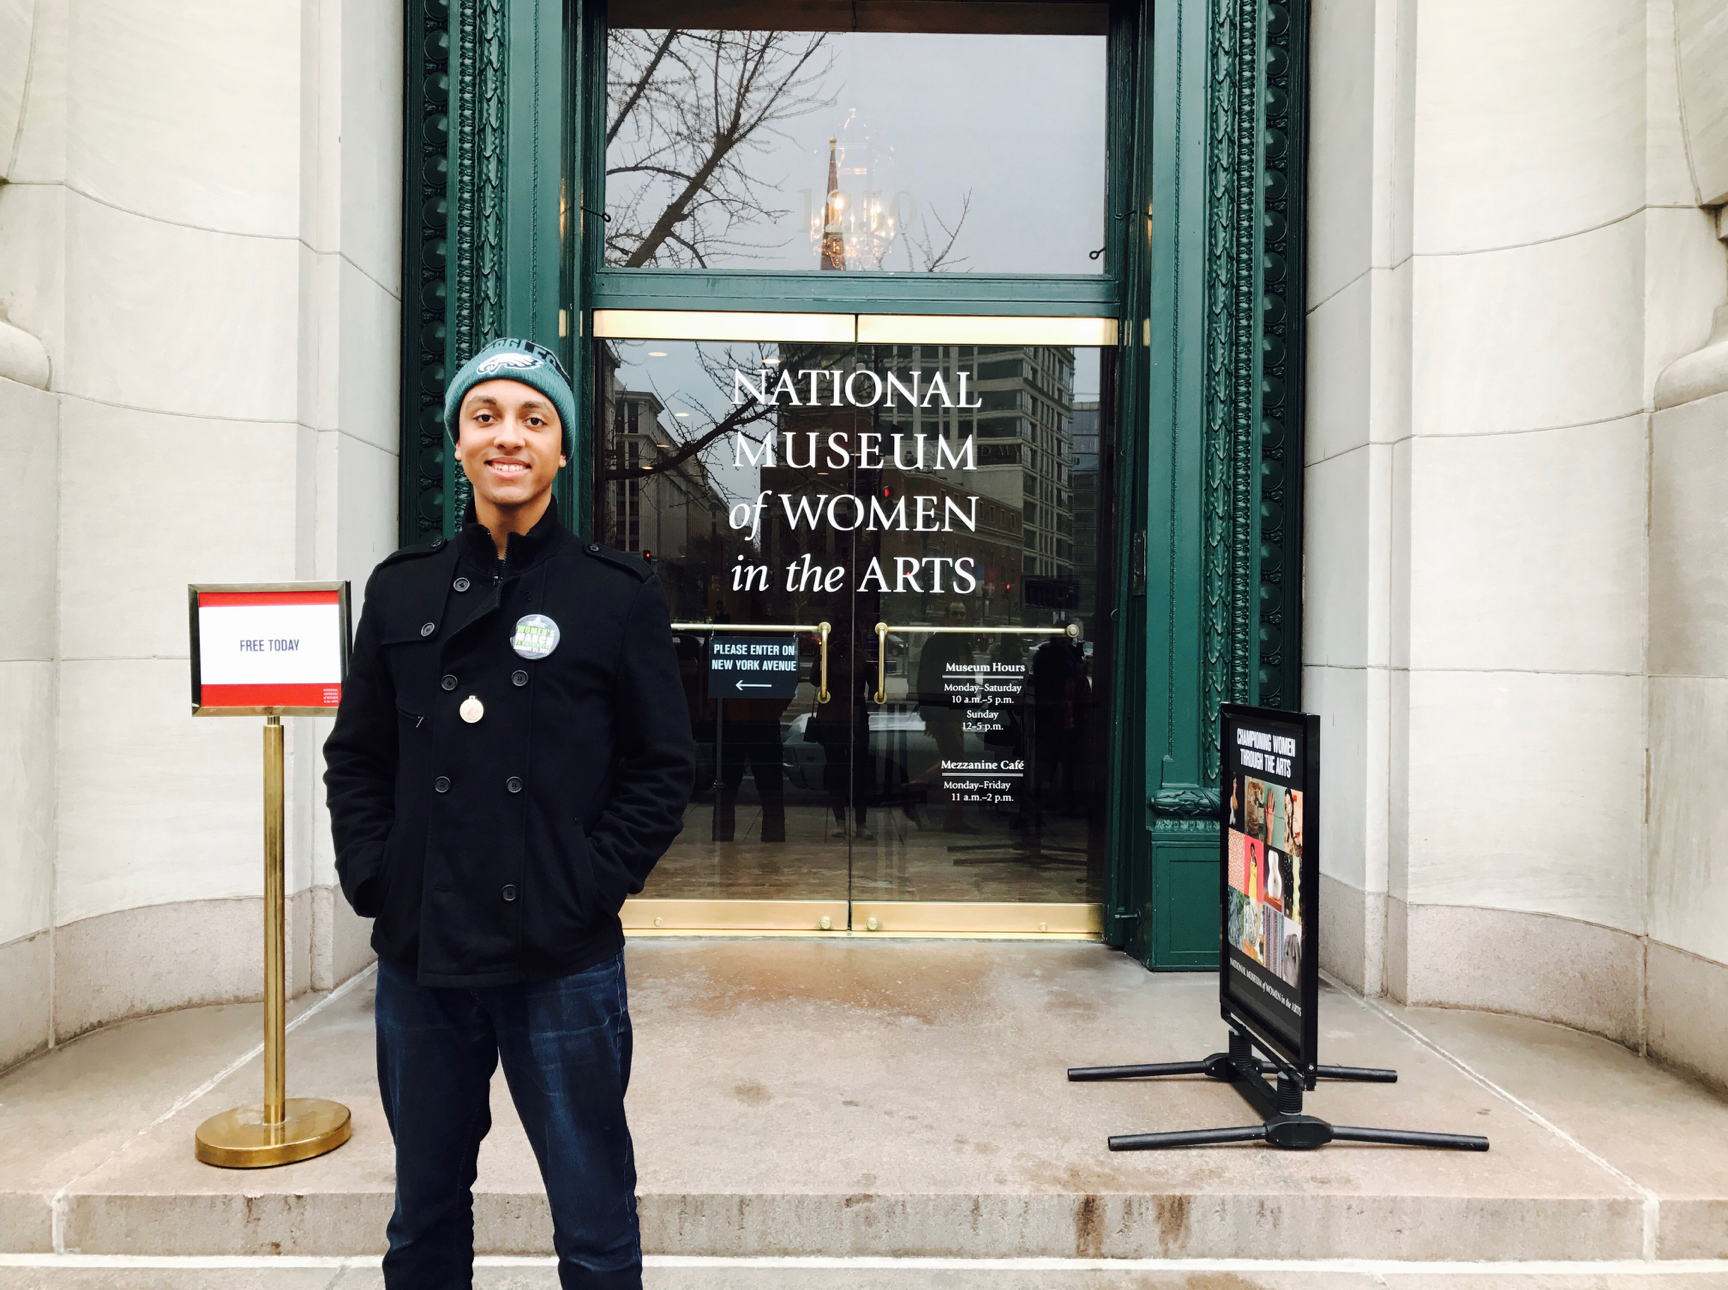 Me, standing in front of the National Museum of Women in the Arts, which offered free admission all weekend